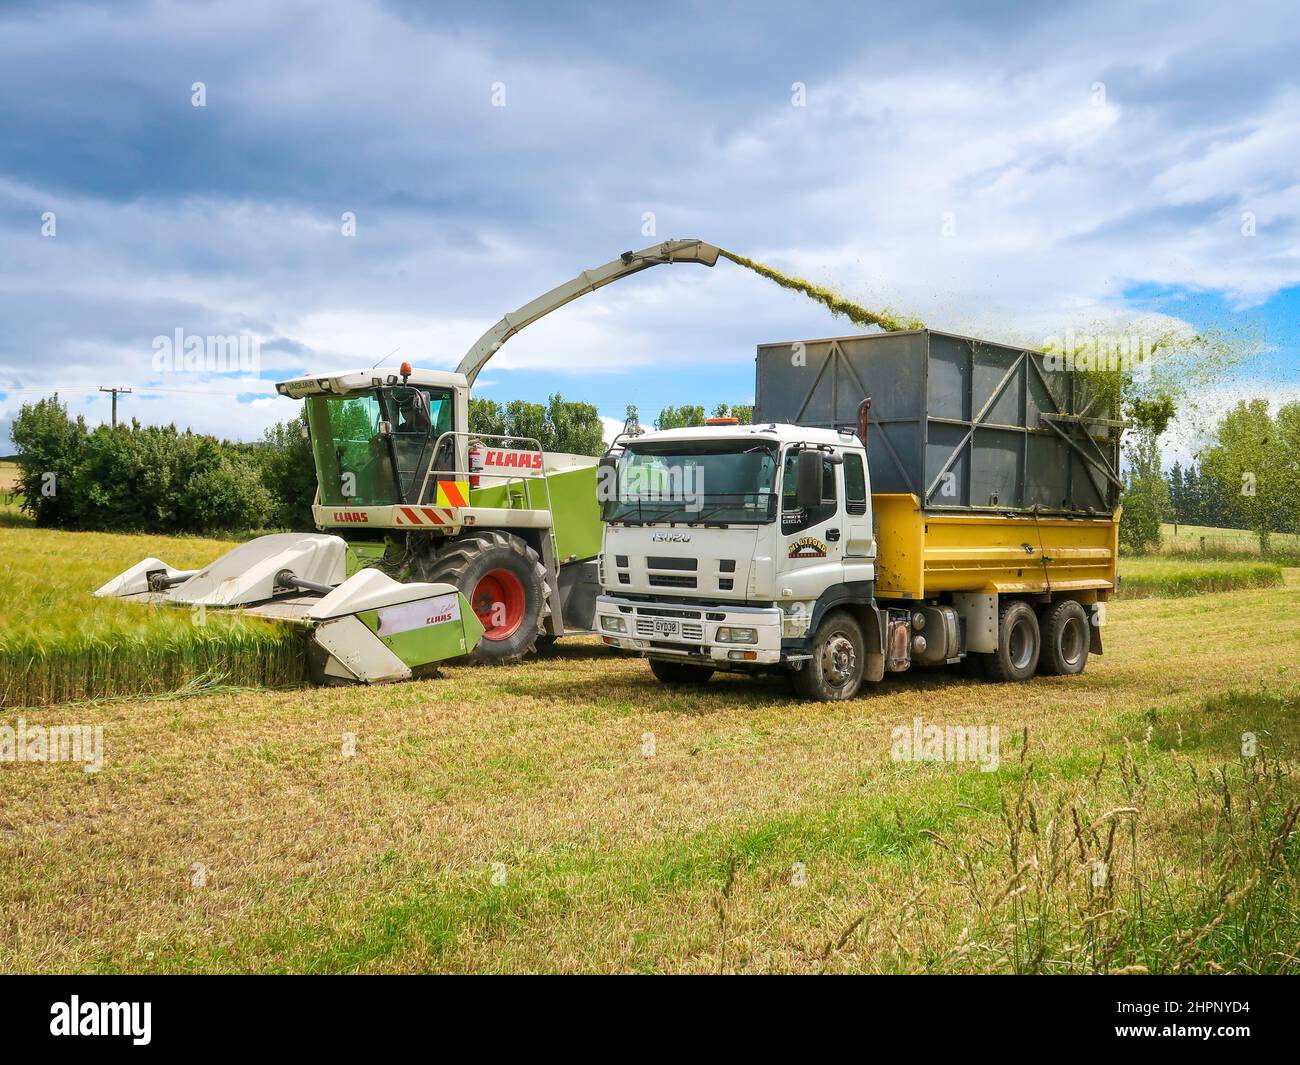 North Canterbury, New Zealand, December 27 2021: A whole crop silage chopper harvests barley and unloads when full, into a truck travelling alongside Stock Photo